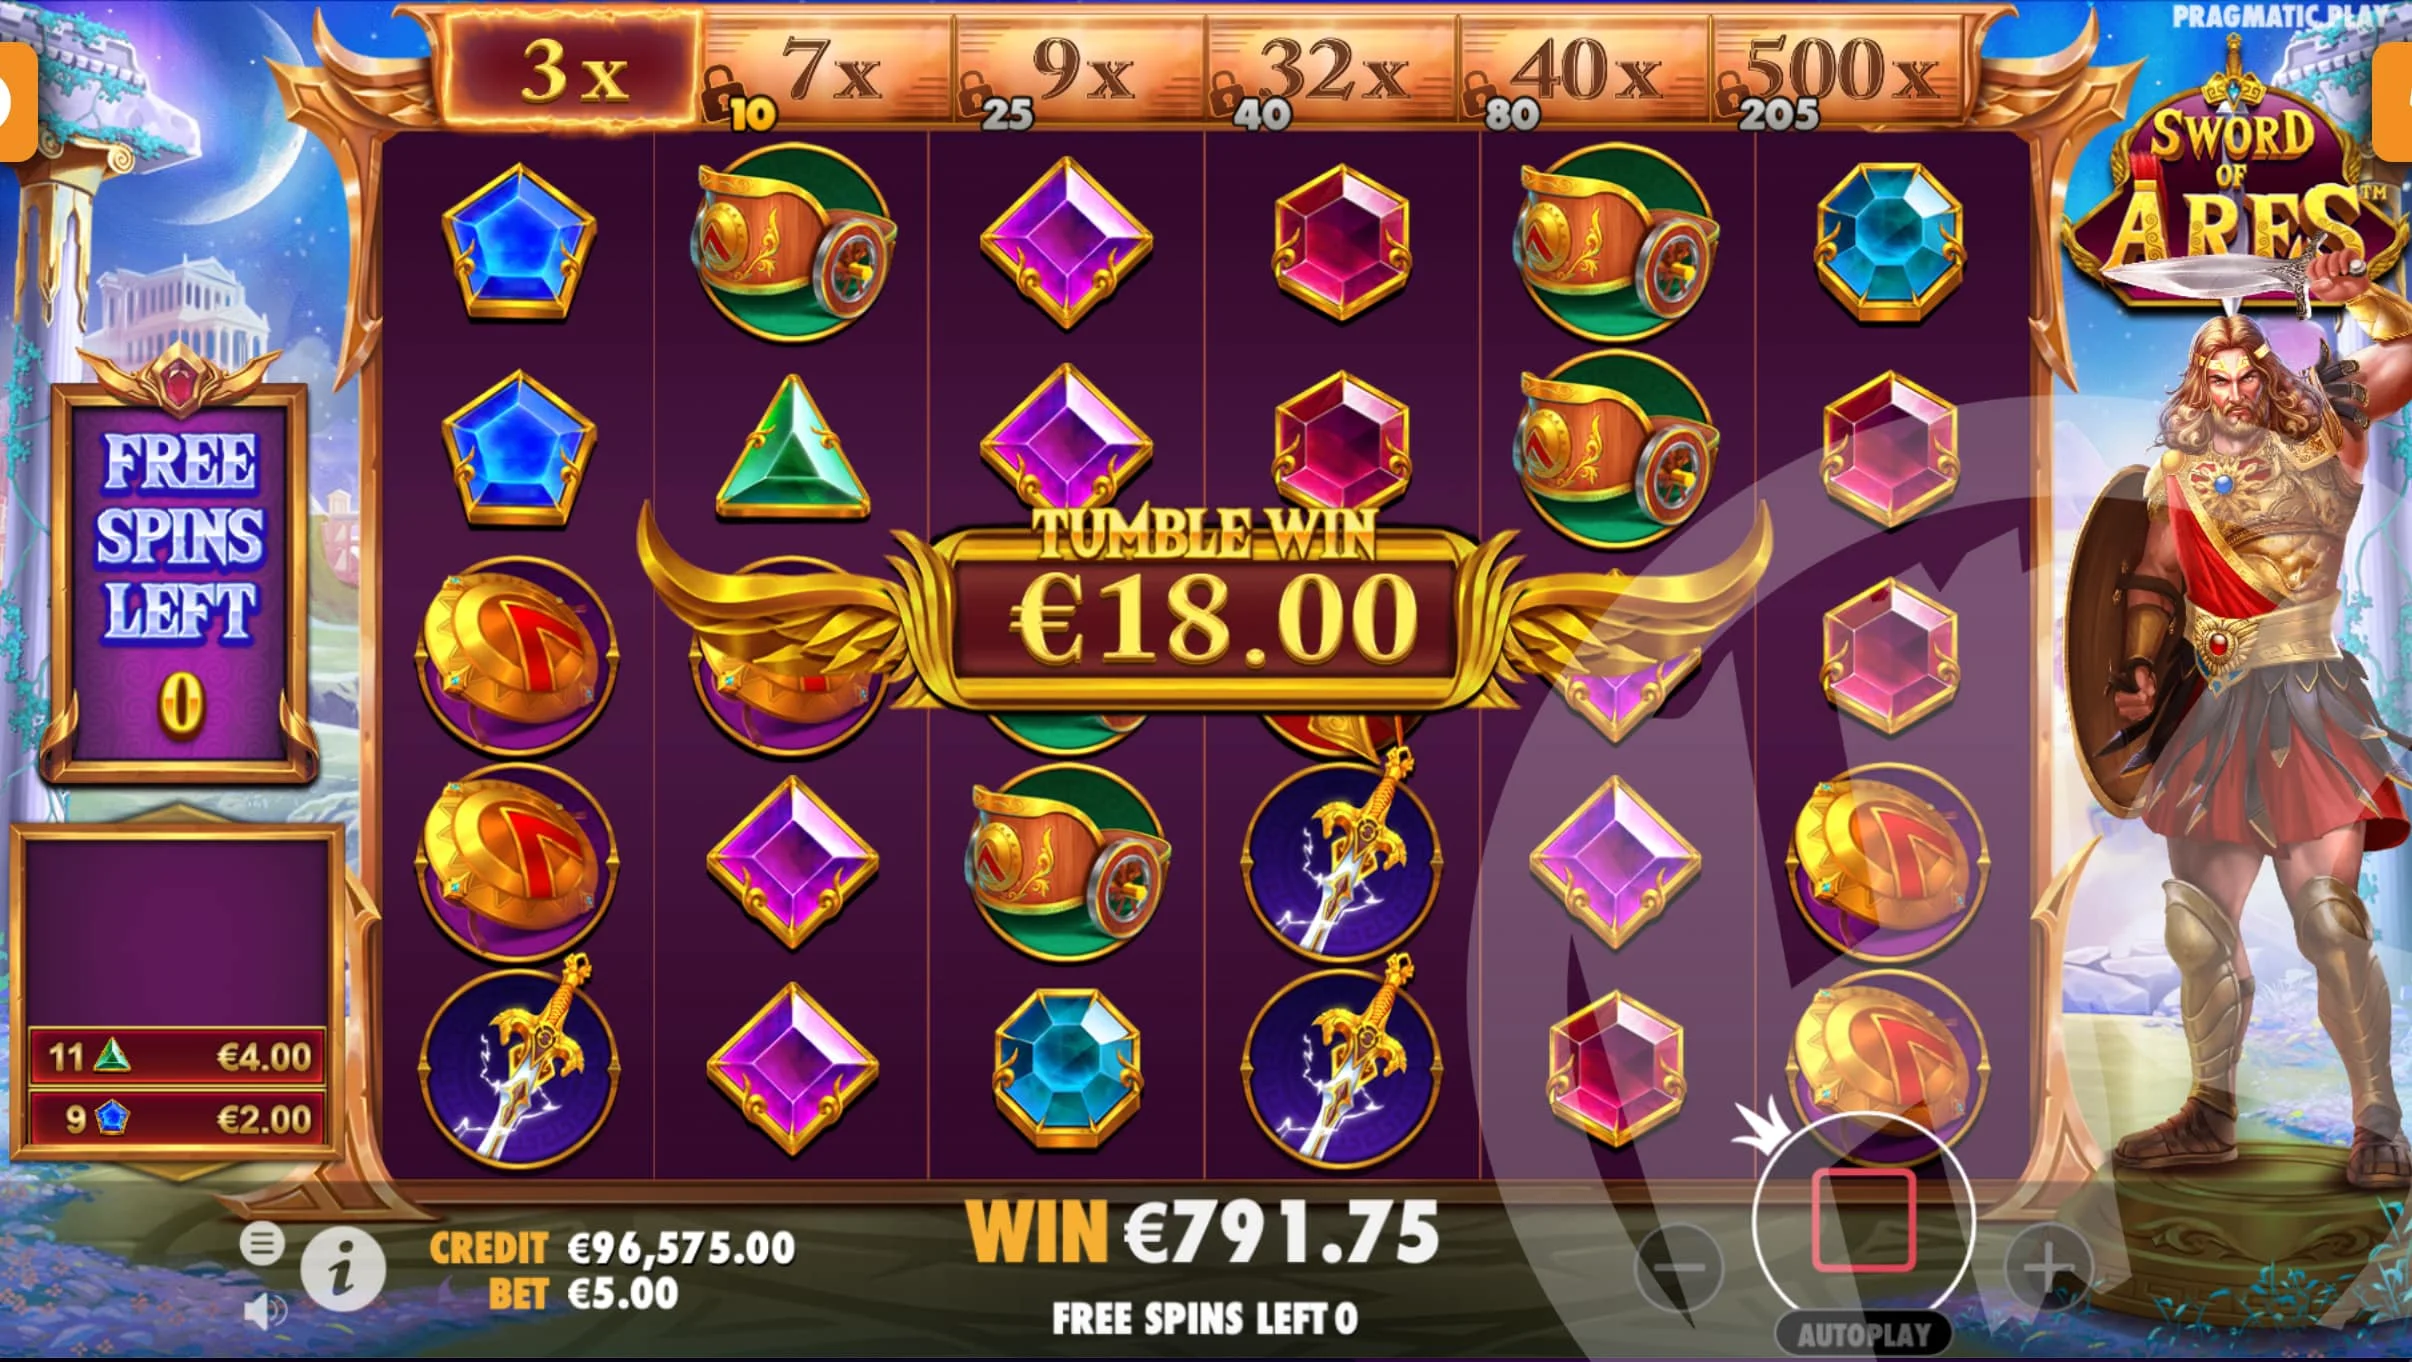 Sword of Ares Free Spins